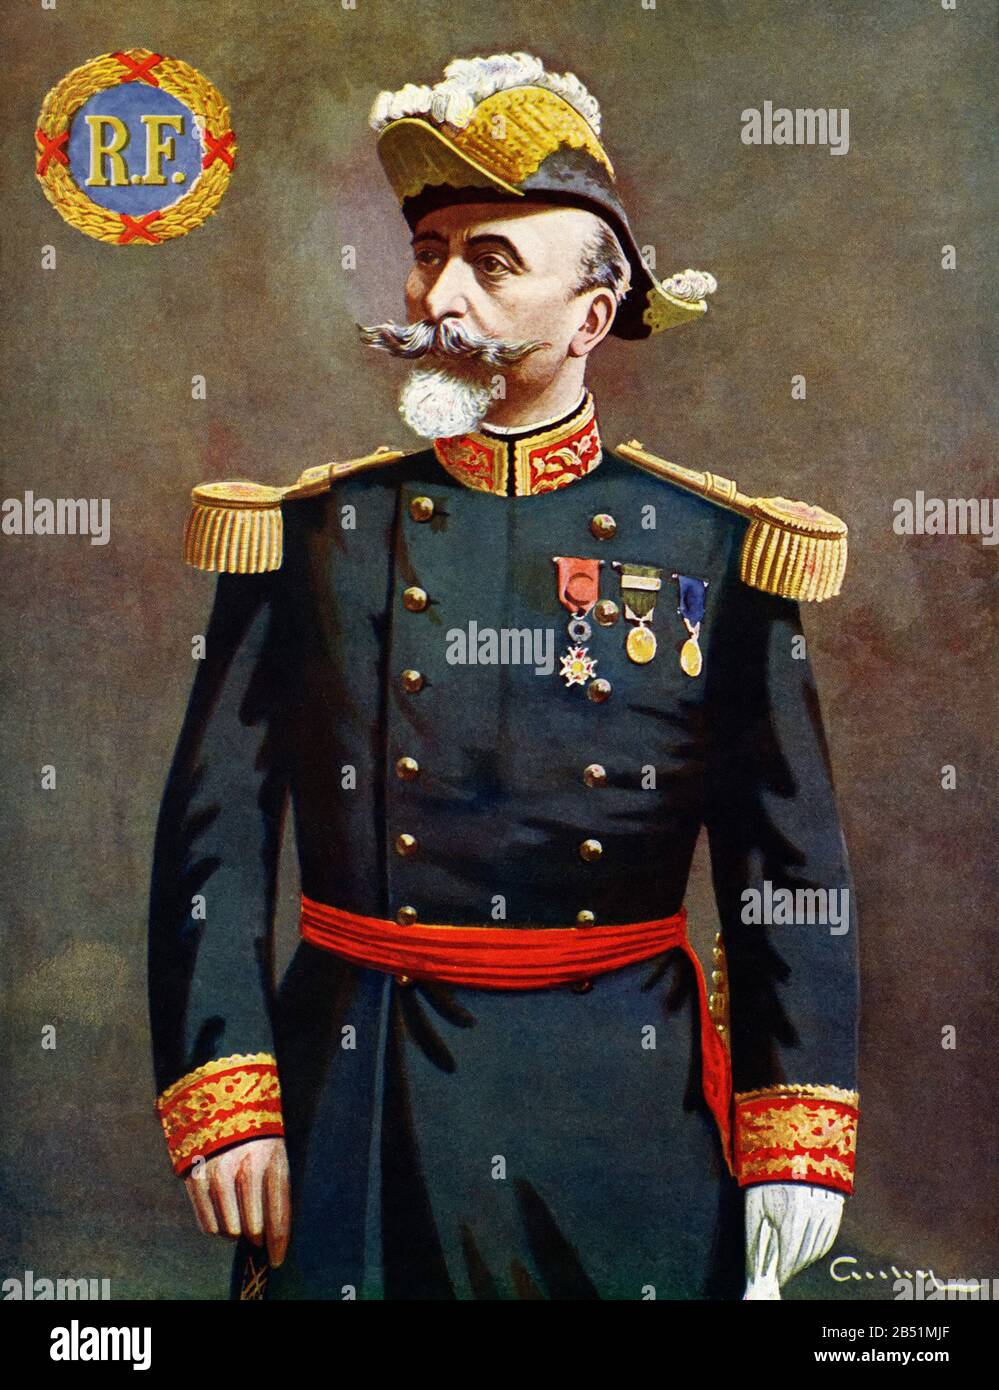 Color portrait of Étienne Godefroy Timoléon de Villaret (1854 - 1931), French army general. French military mission in Greece in the First World War. Stock Photo